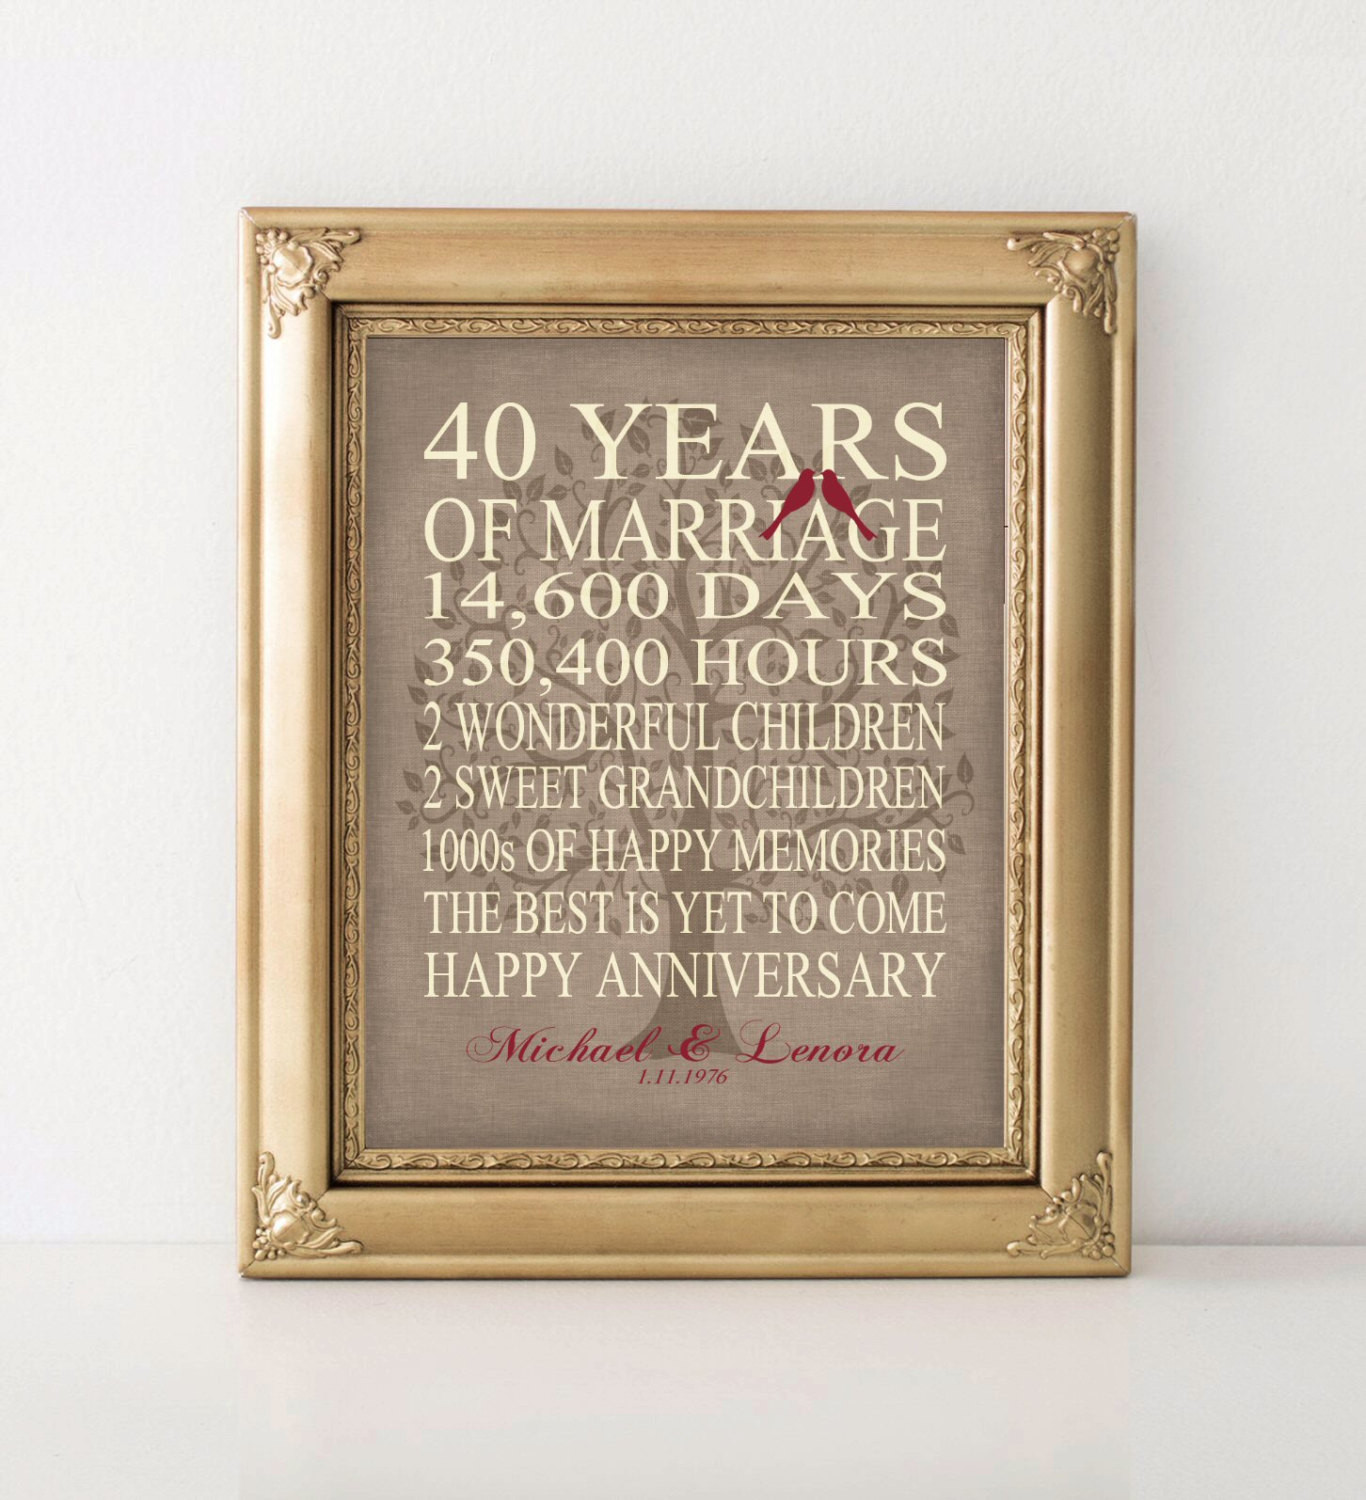 40Th Wedding Anniversary Gift Ideas For Couples
 Wedding Anniversary Gift 40th Anniversary Gift Personalized